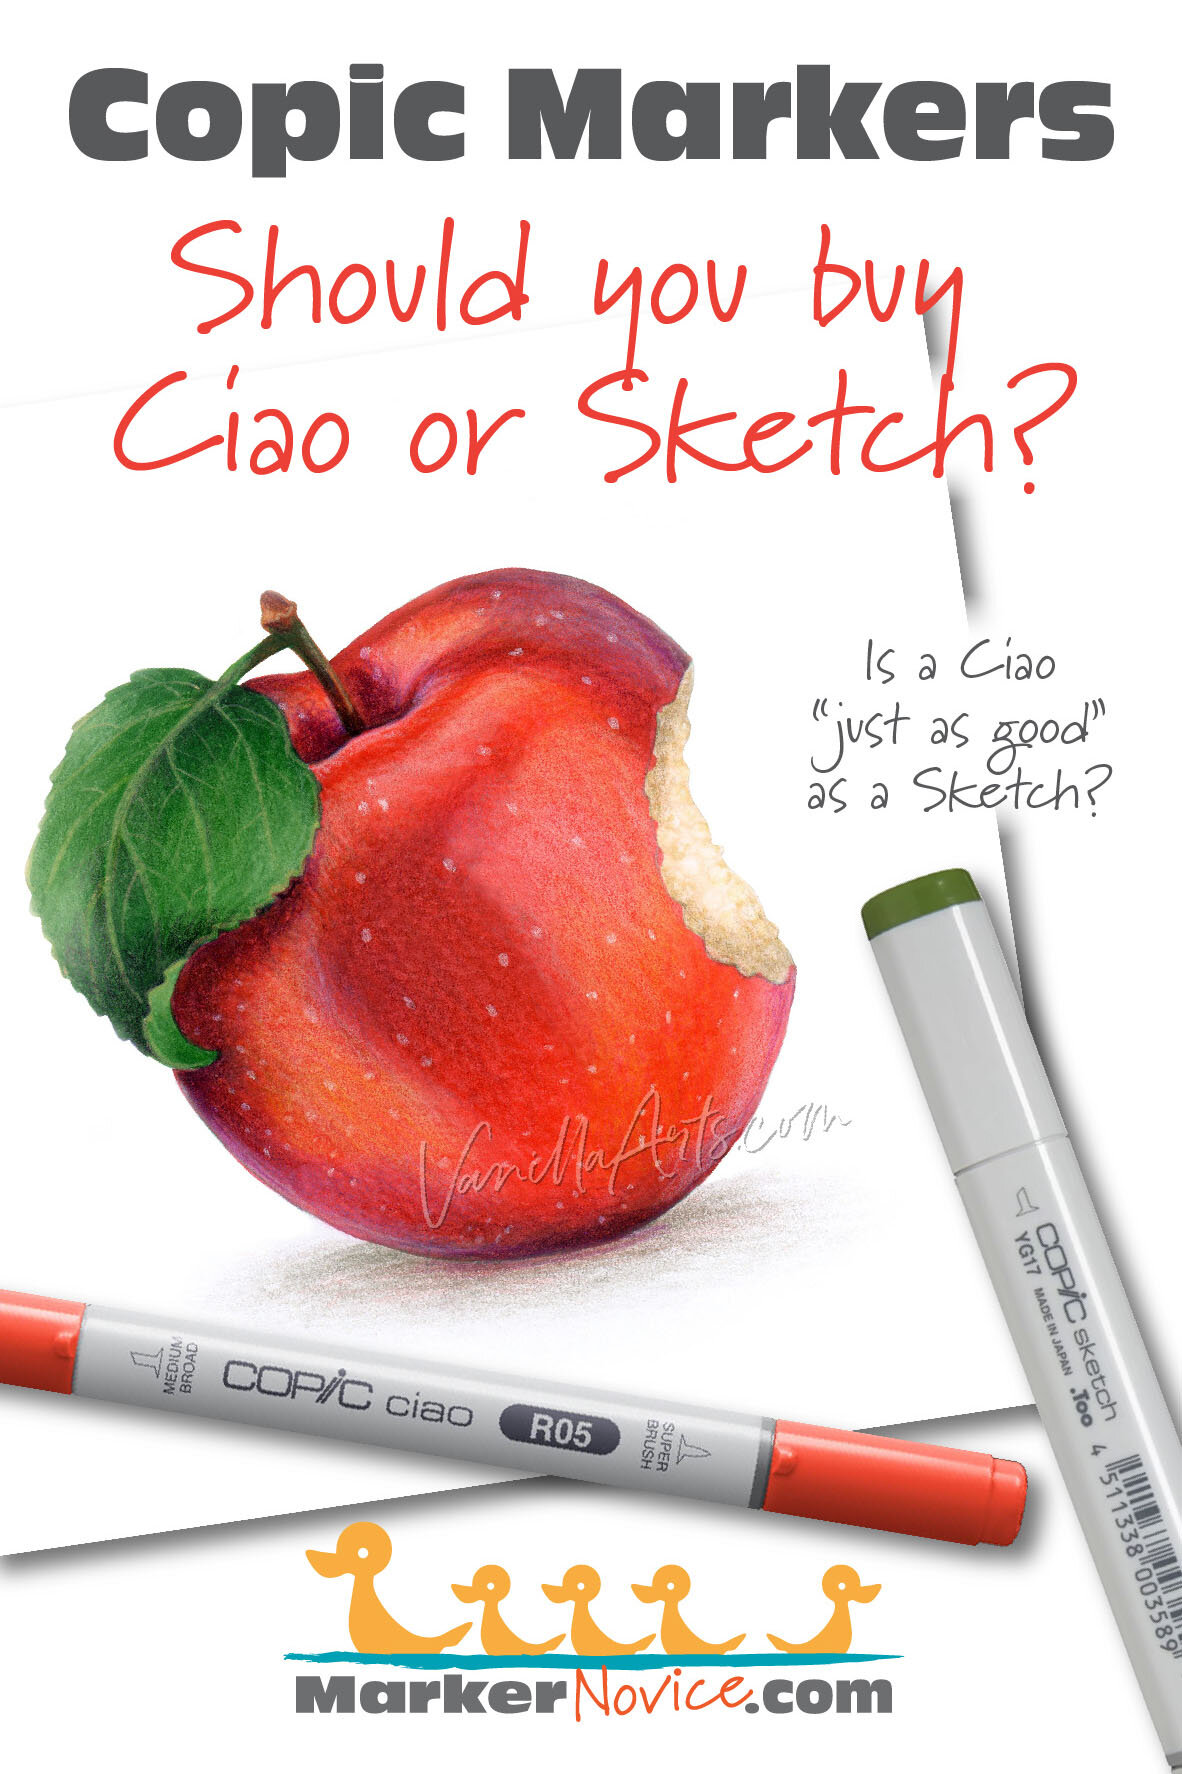 Copic Sketch vs Ciao: The Great Markers Debate